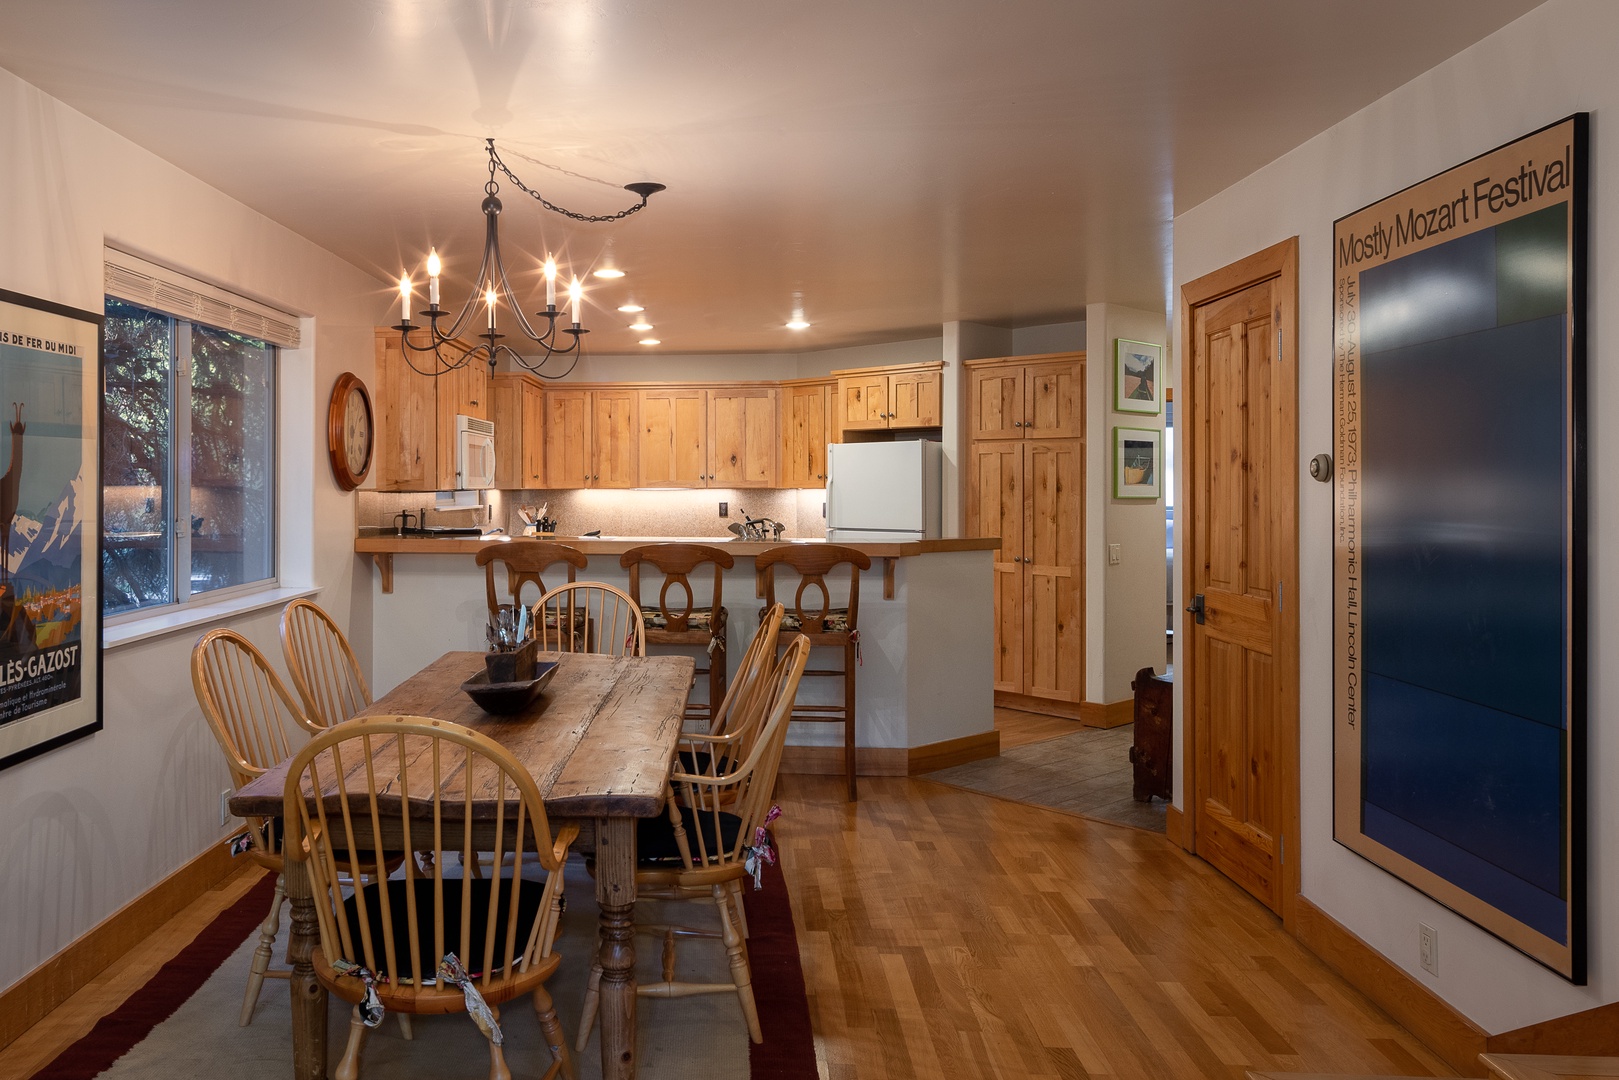 Ketchum Vacation Rentals, Bridgepoint Charm - The formal dining area is overlooked by the kitchen